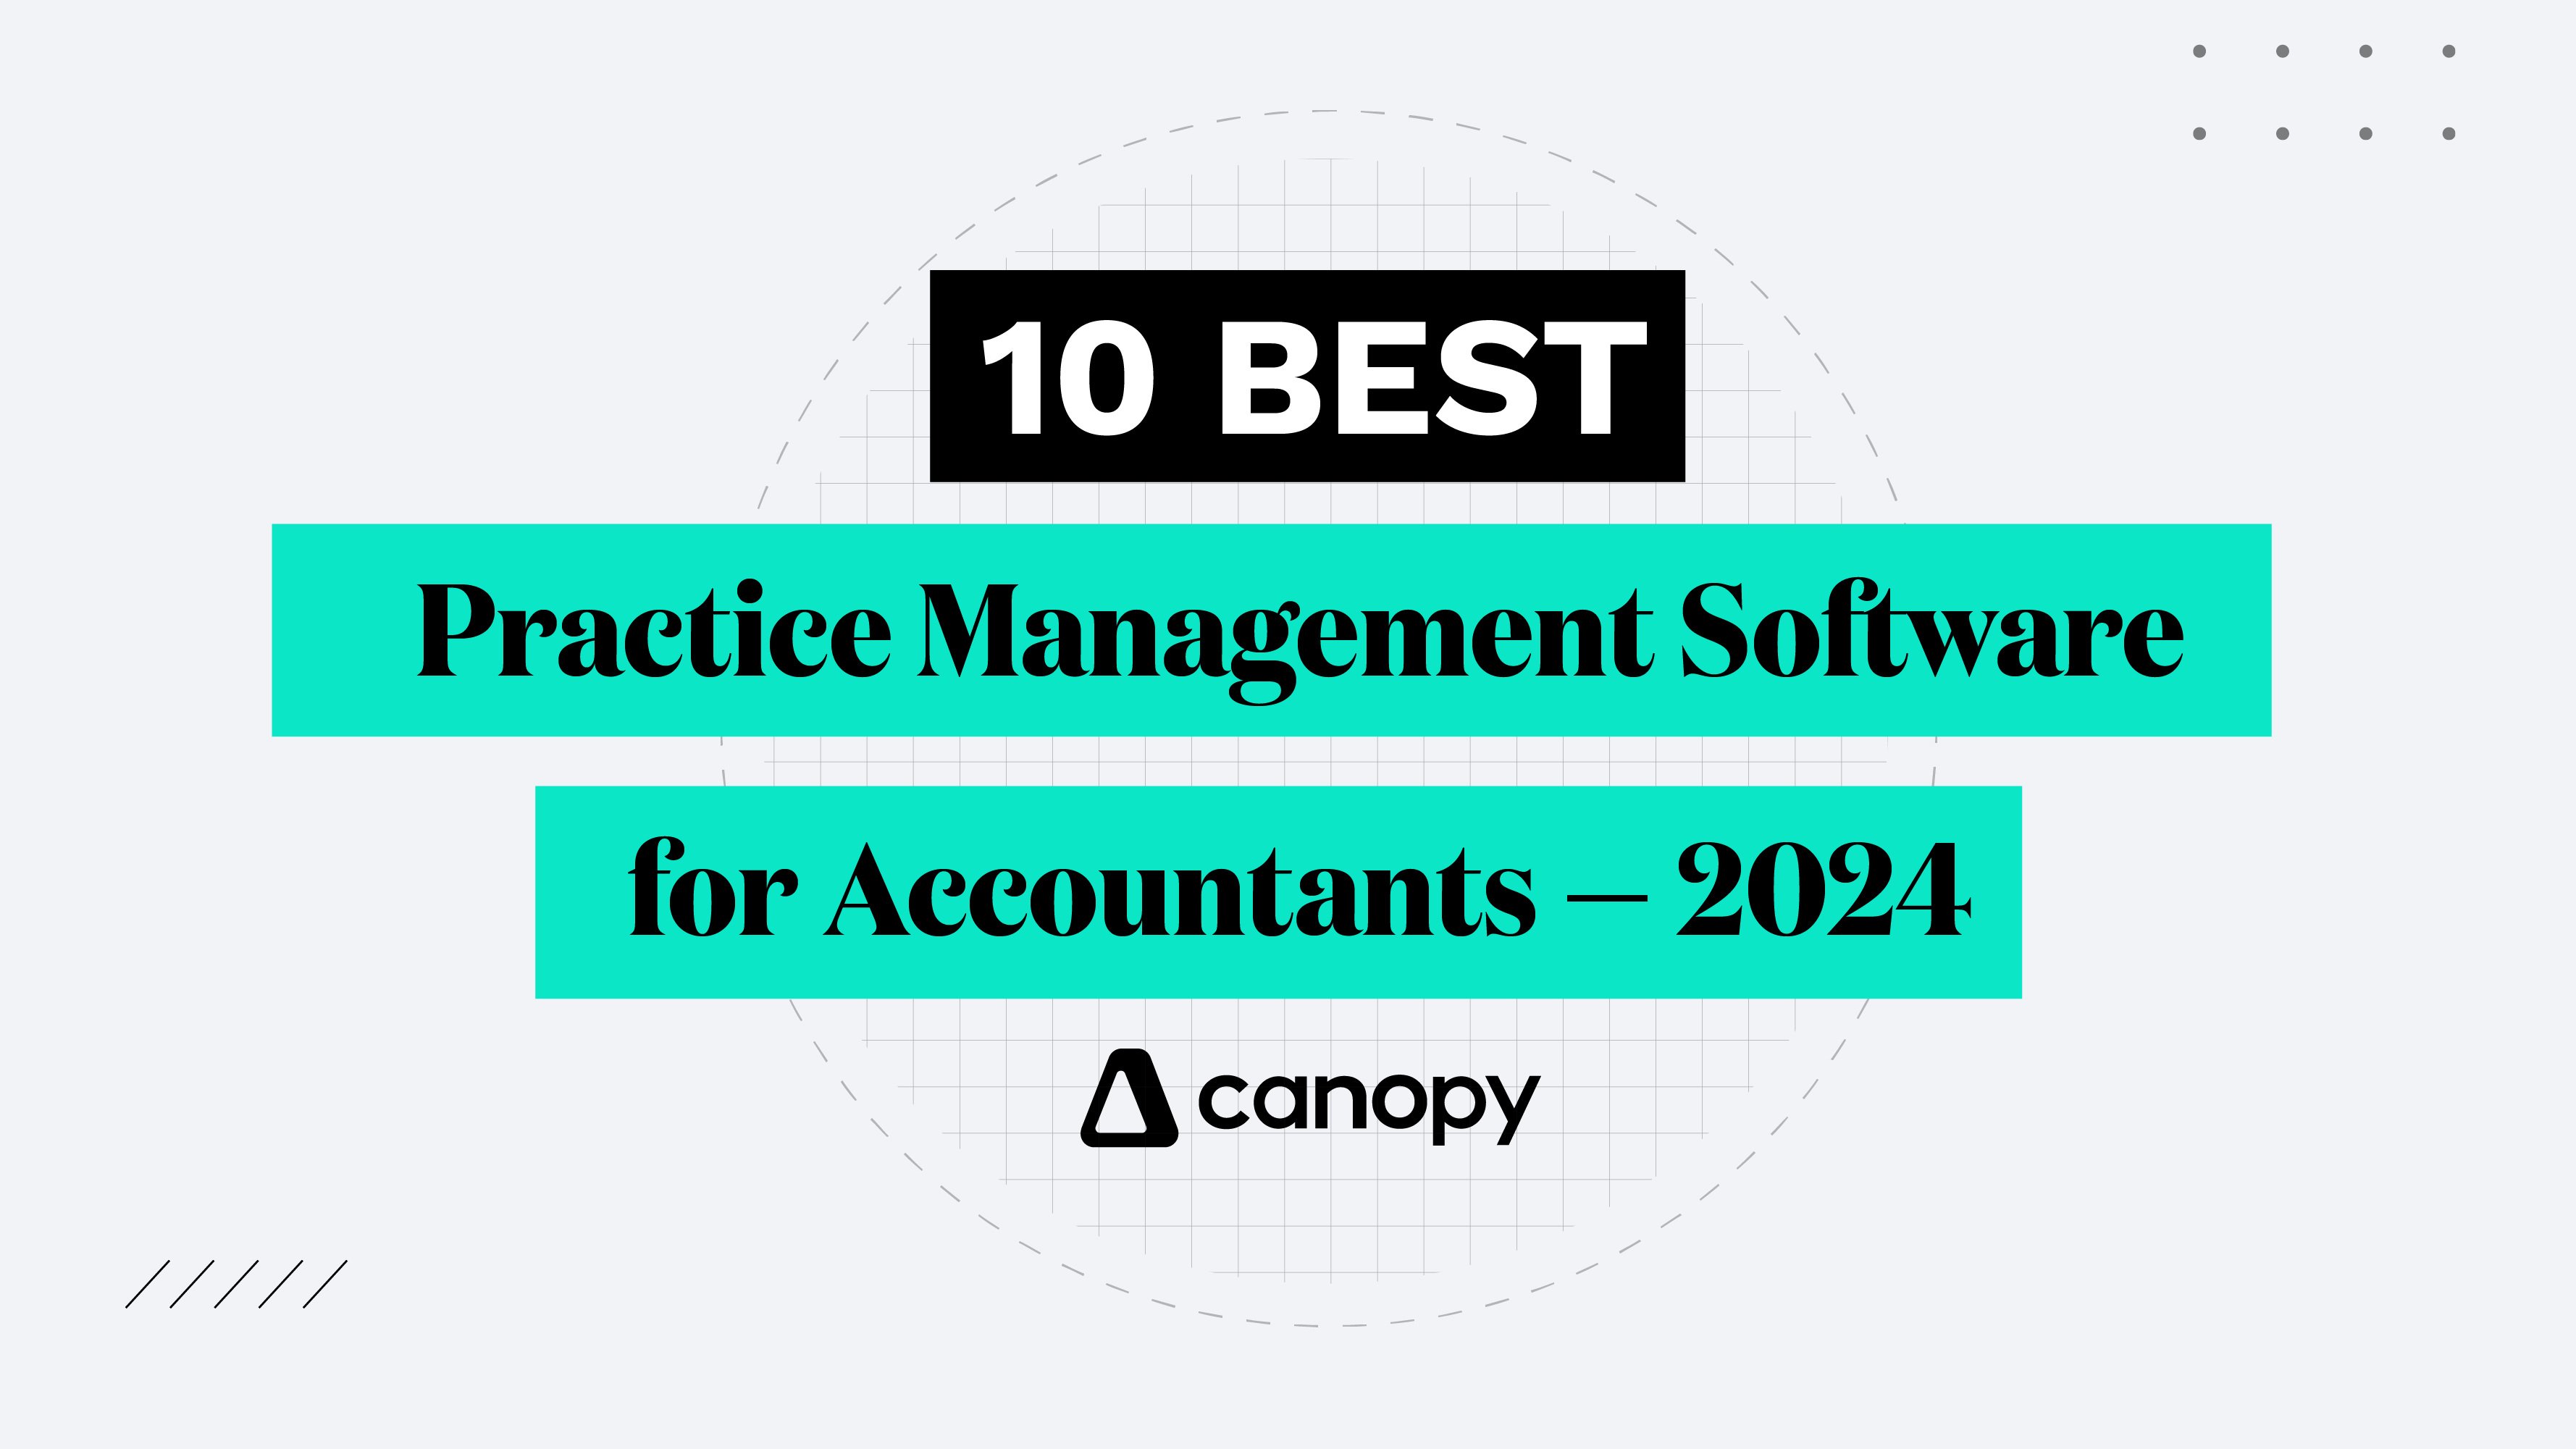 10 Best Practice Management Software for Accountants — 2024